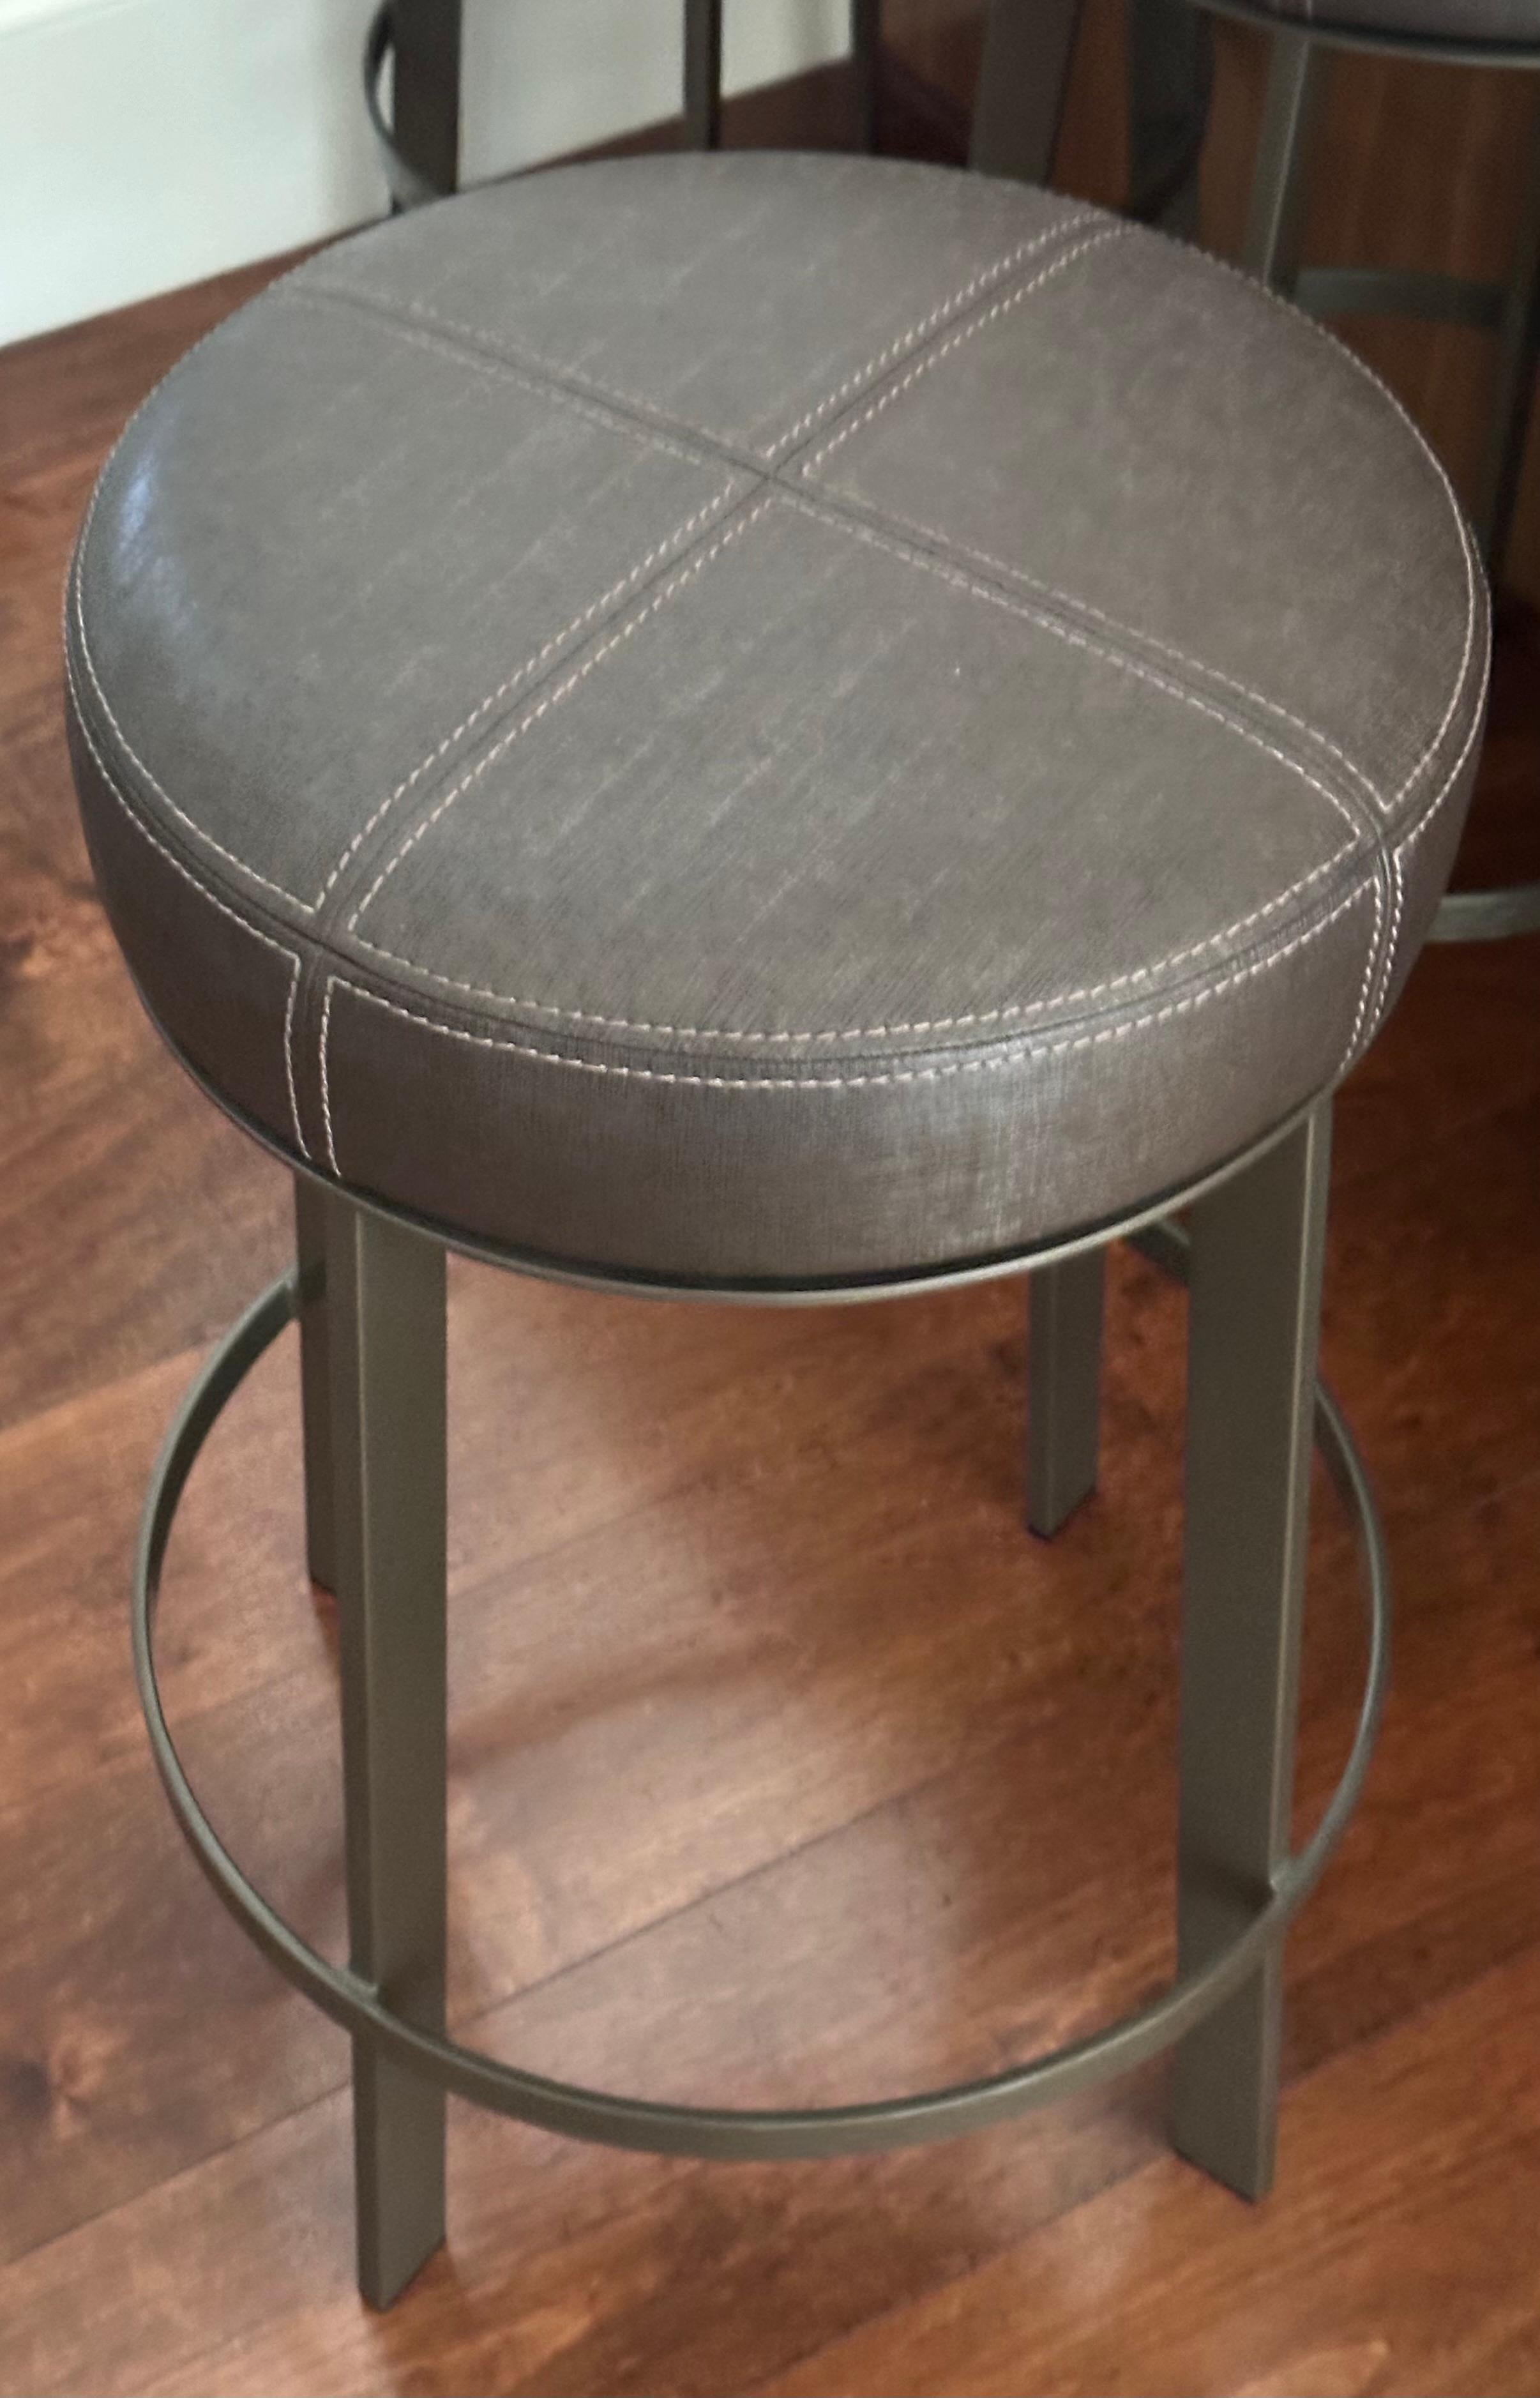 Berman Rosetti for Mimi London Industrial Chic Bar Height Stool. This listing is for one stool but we actually have three available.